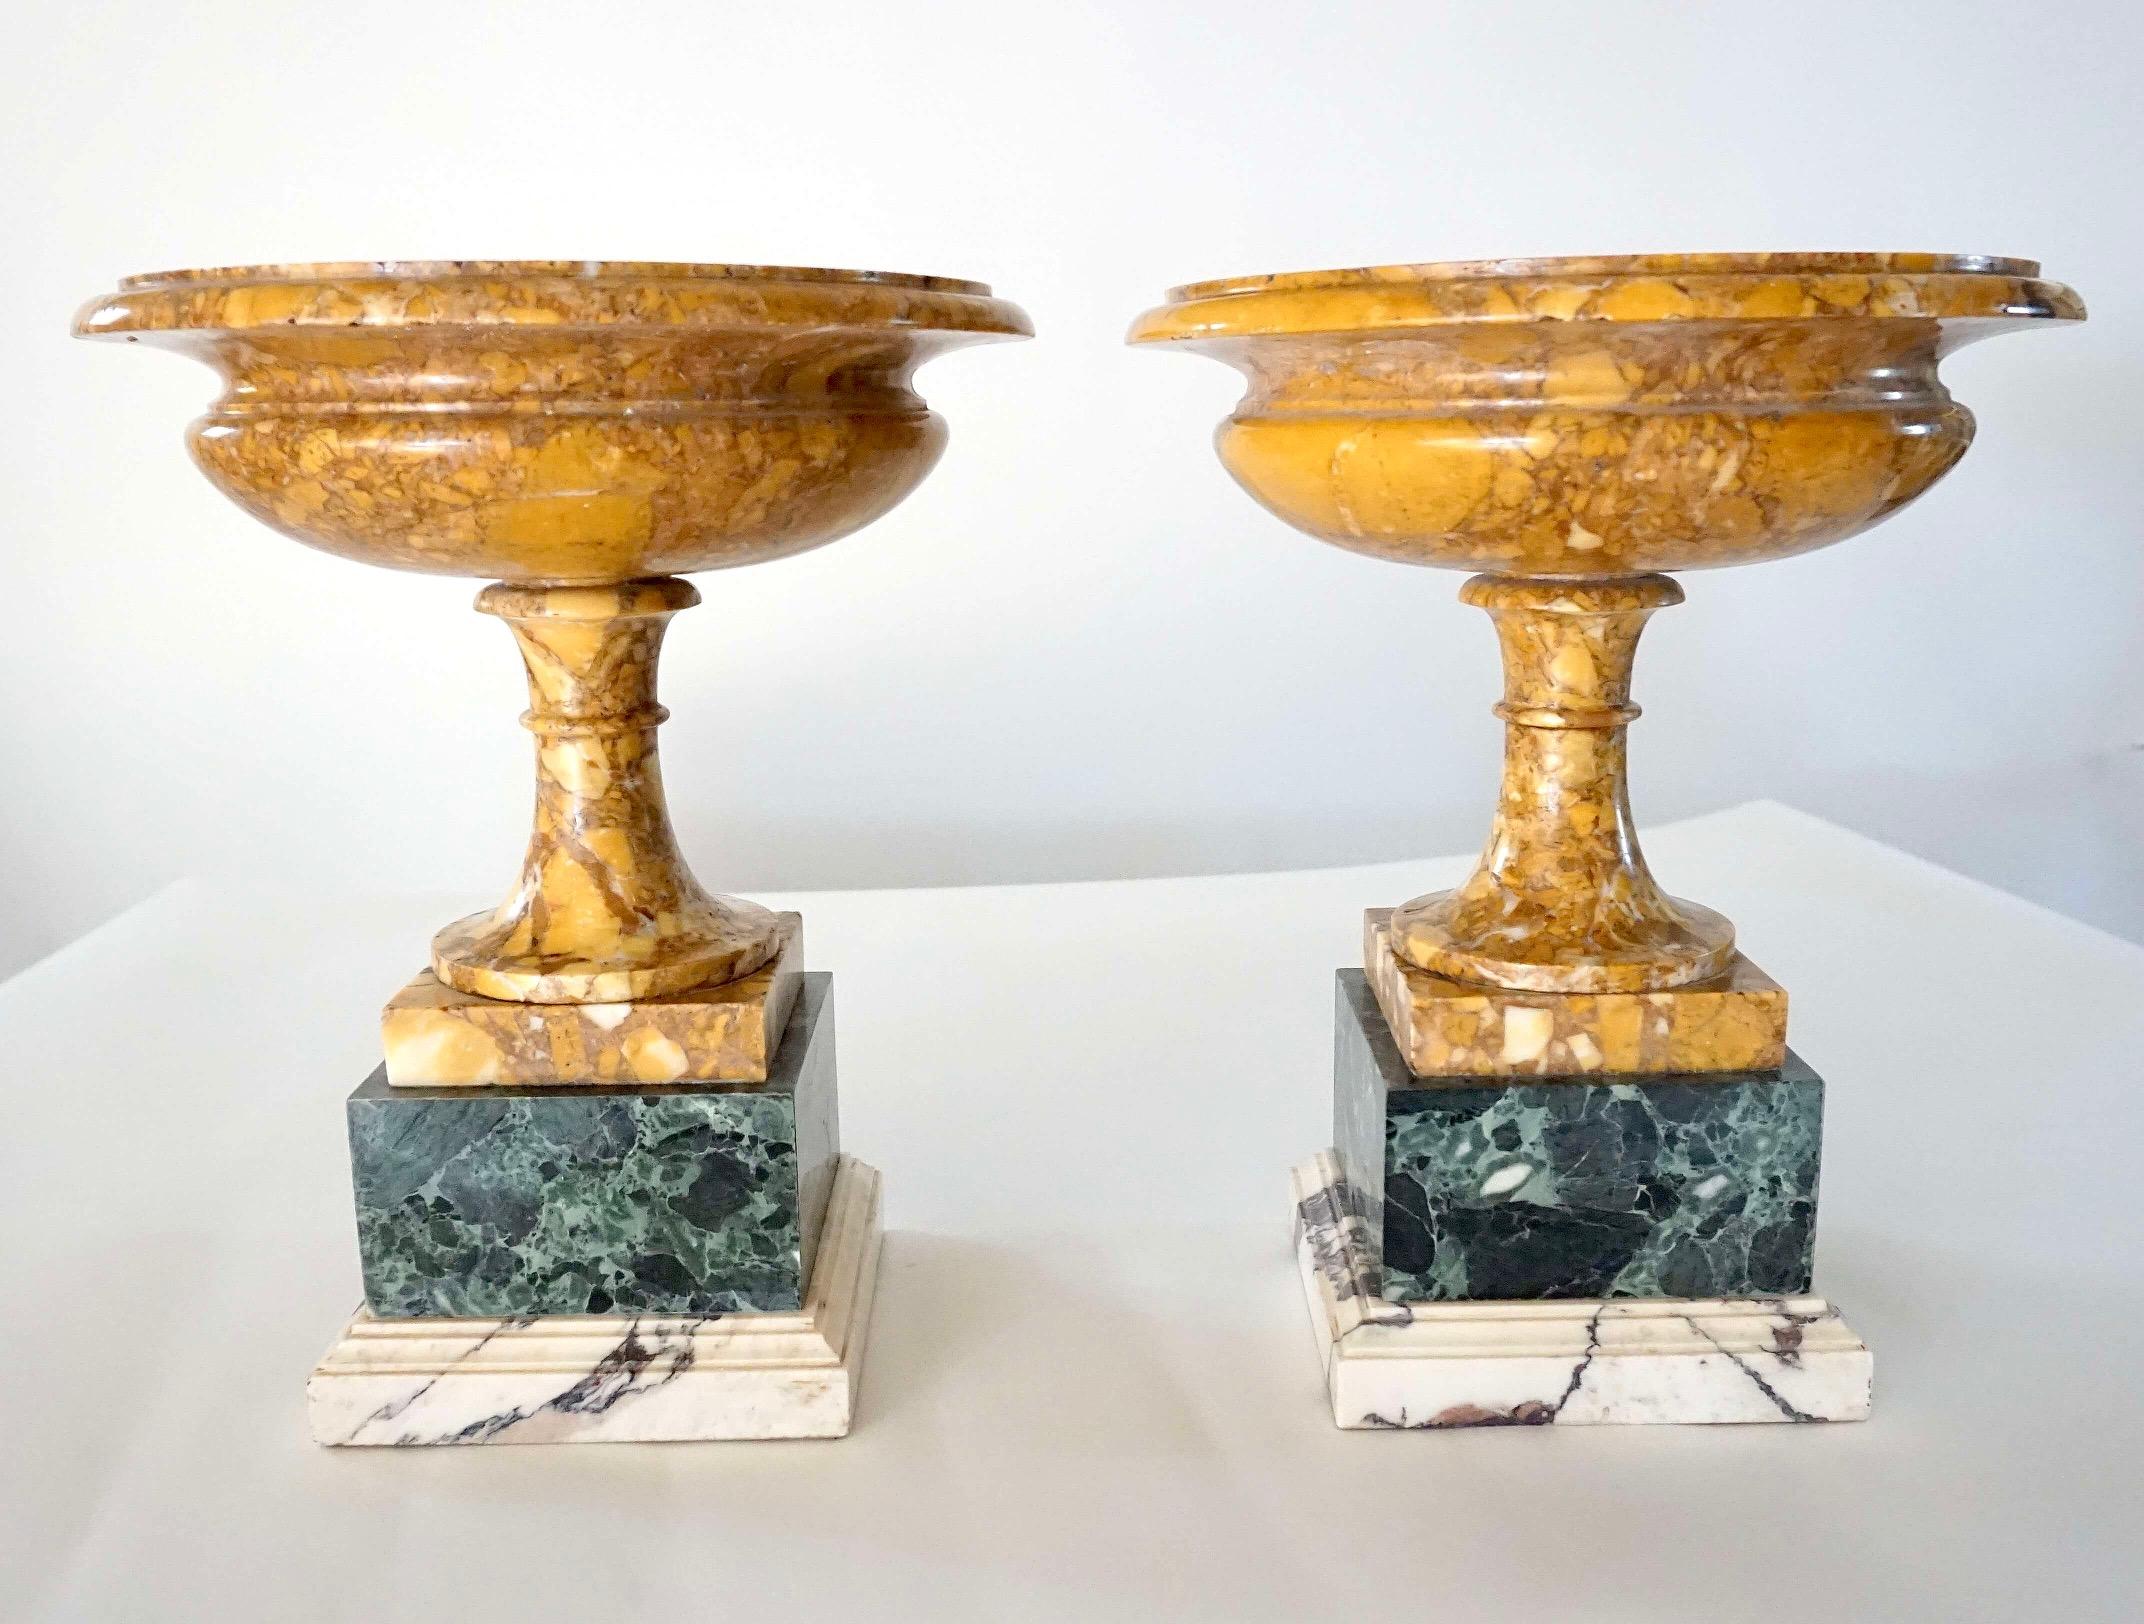 Pair of 19th Century Italian Neoclassical Tazze in Polychrome Marbles For Sale 5